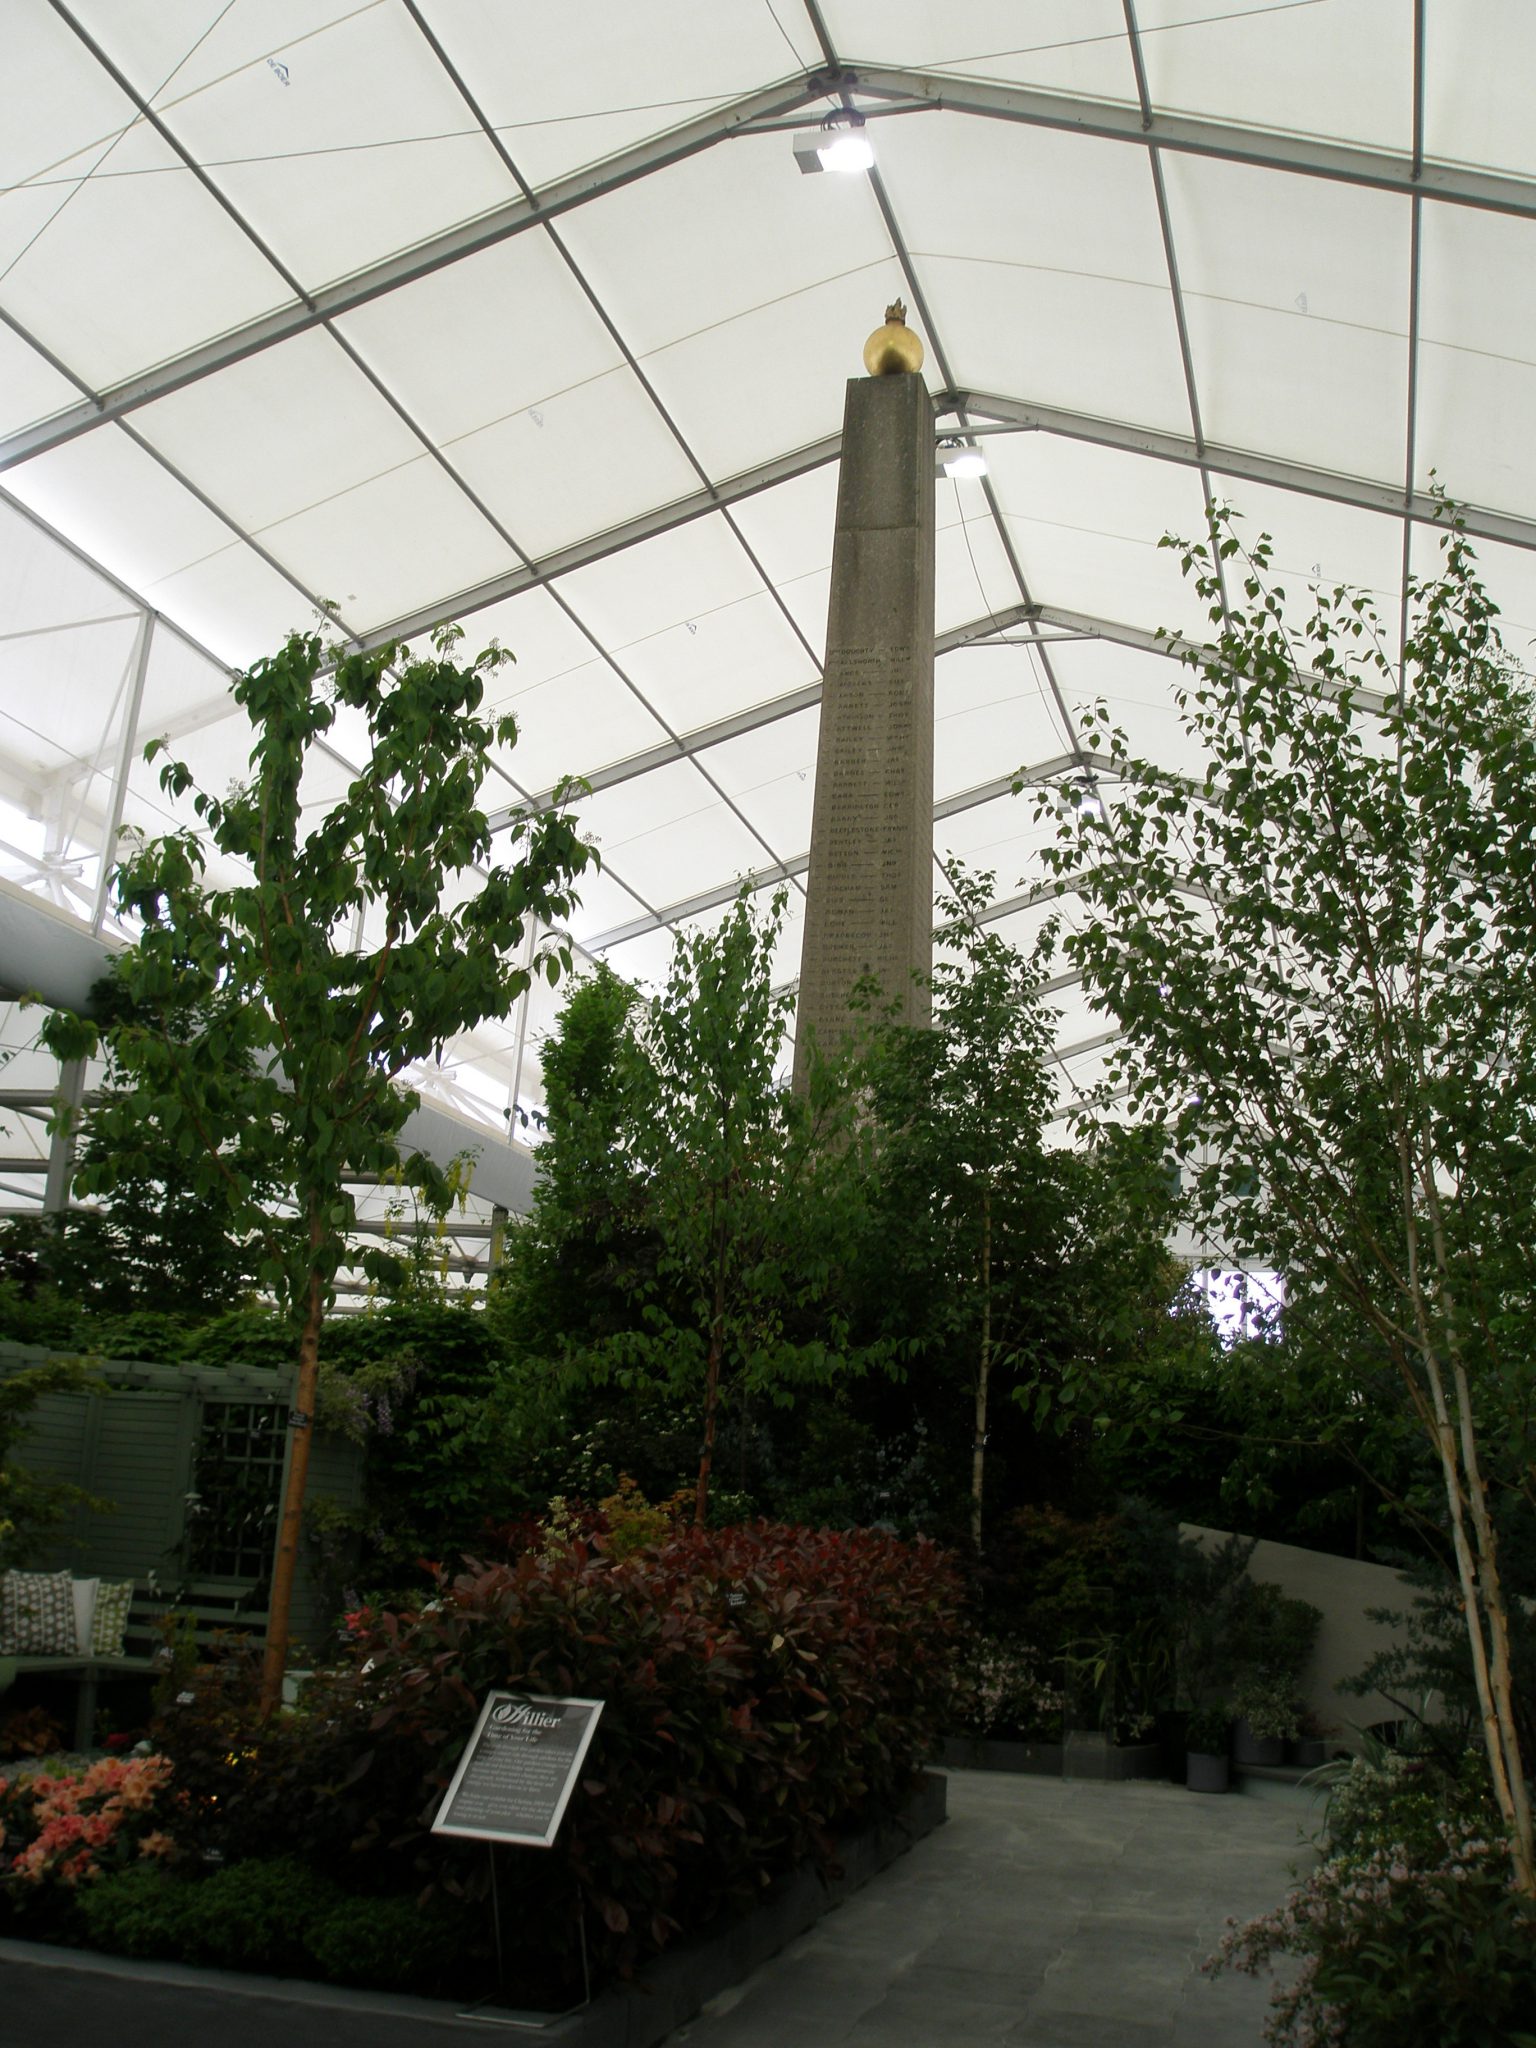 Here's that same obelisk, now become the Center, in the Great Pavilion...way back when, on May 17th, 2009.